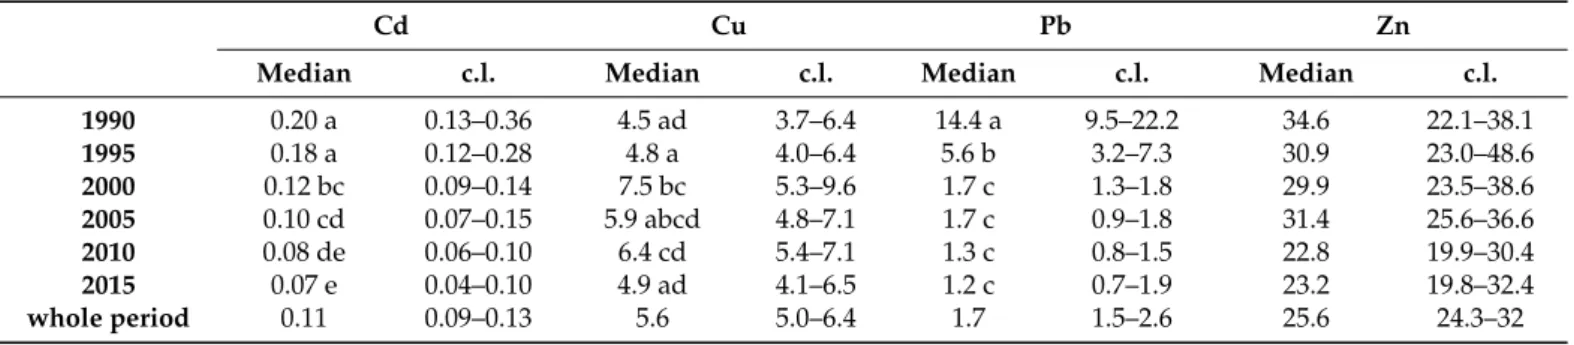 Table 1. Median and 95% confidence limits (c.l.) of Cd, Cu, Pb, and Zn concentrations (µg g −1 dw) in moss at background sites of Switzerland